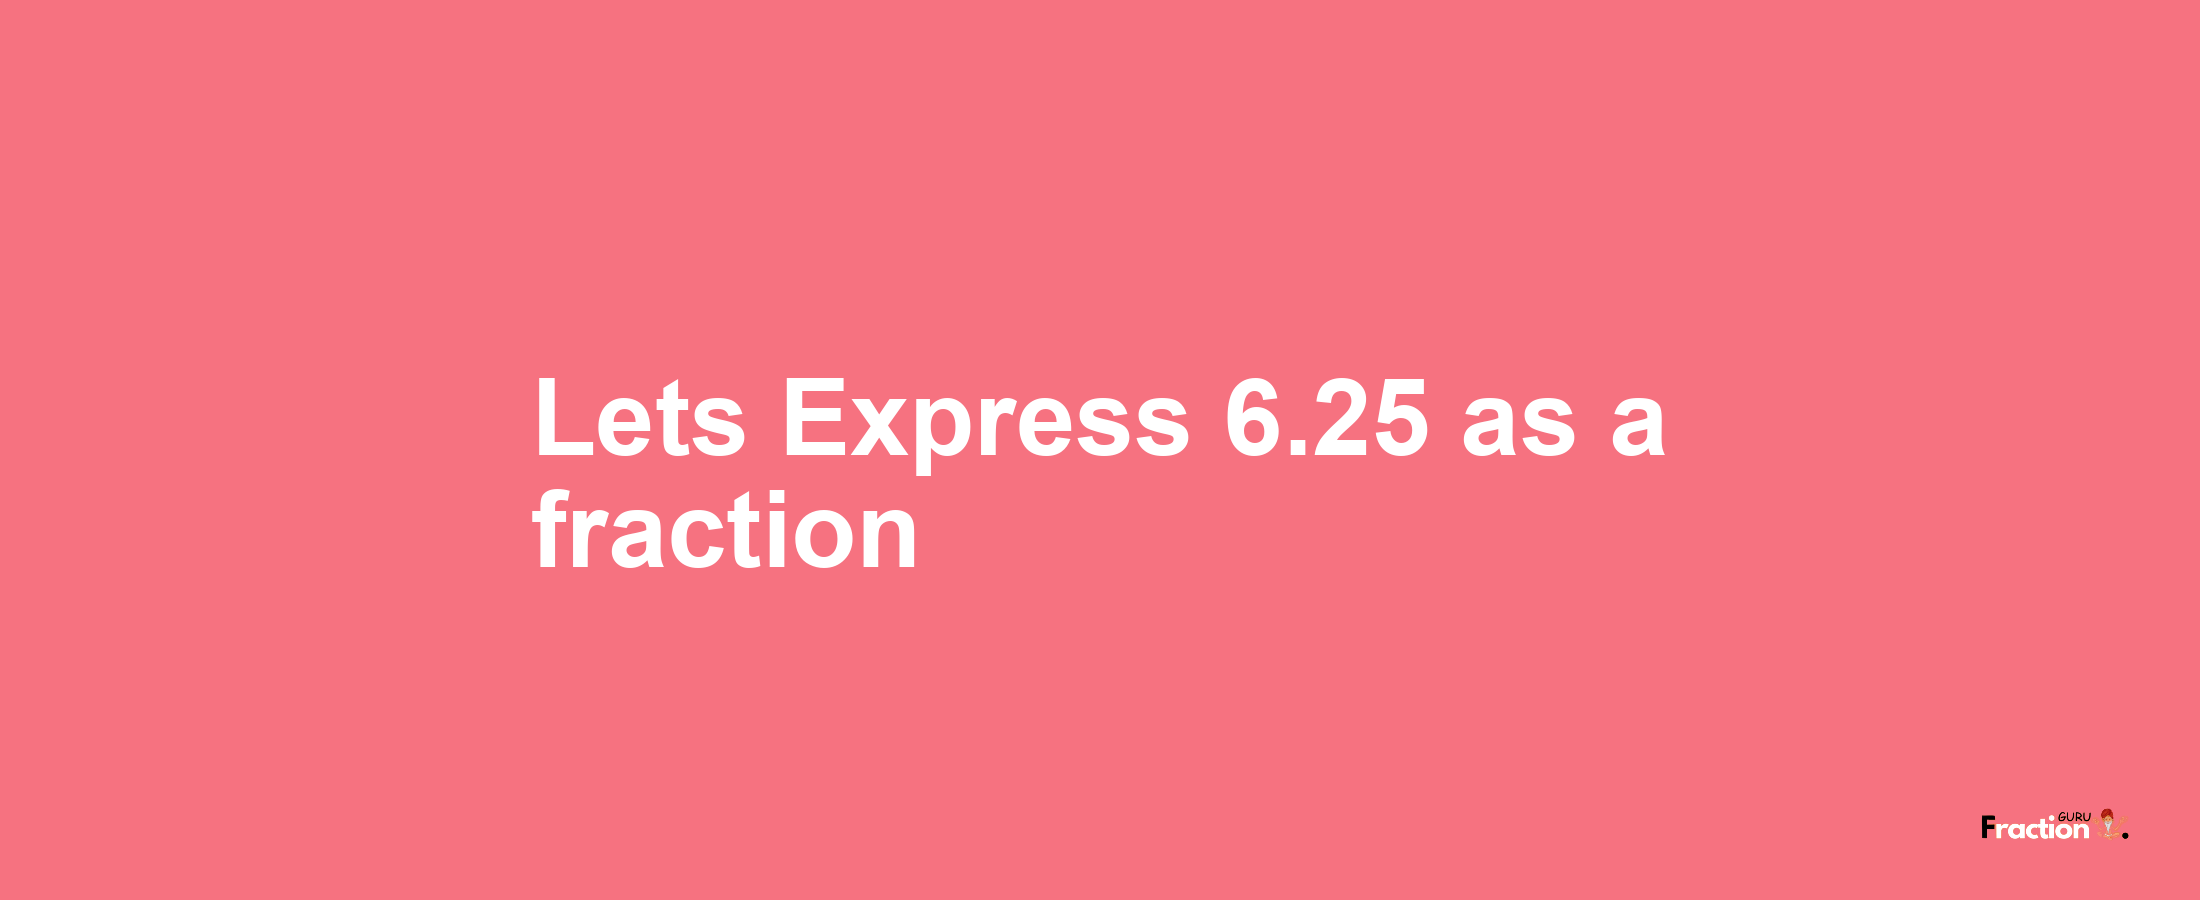 Lets Express 6.25 as afraction